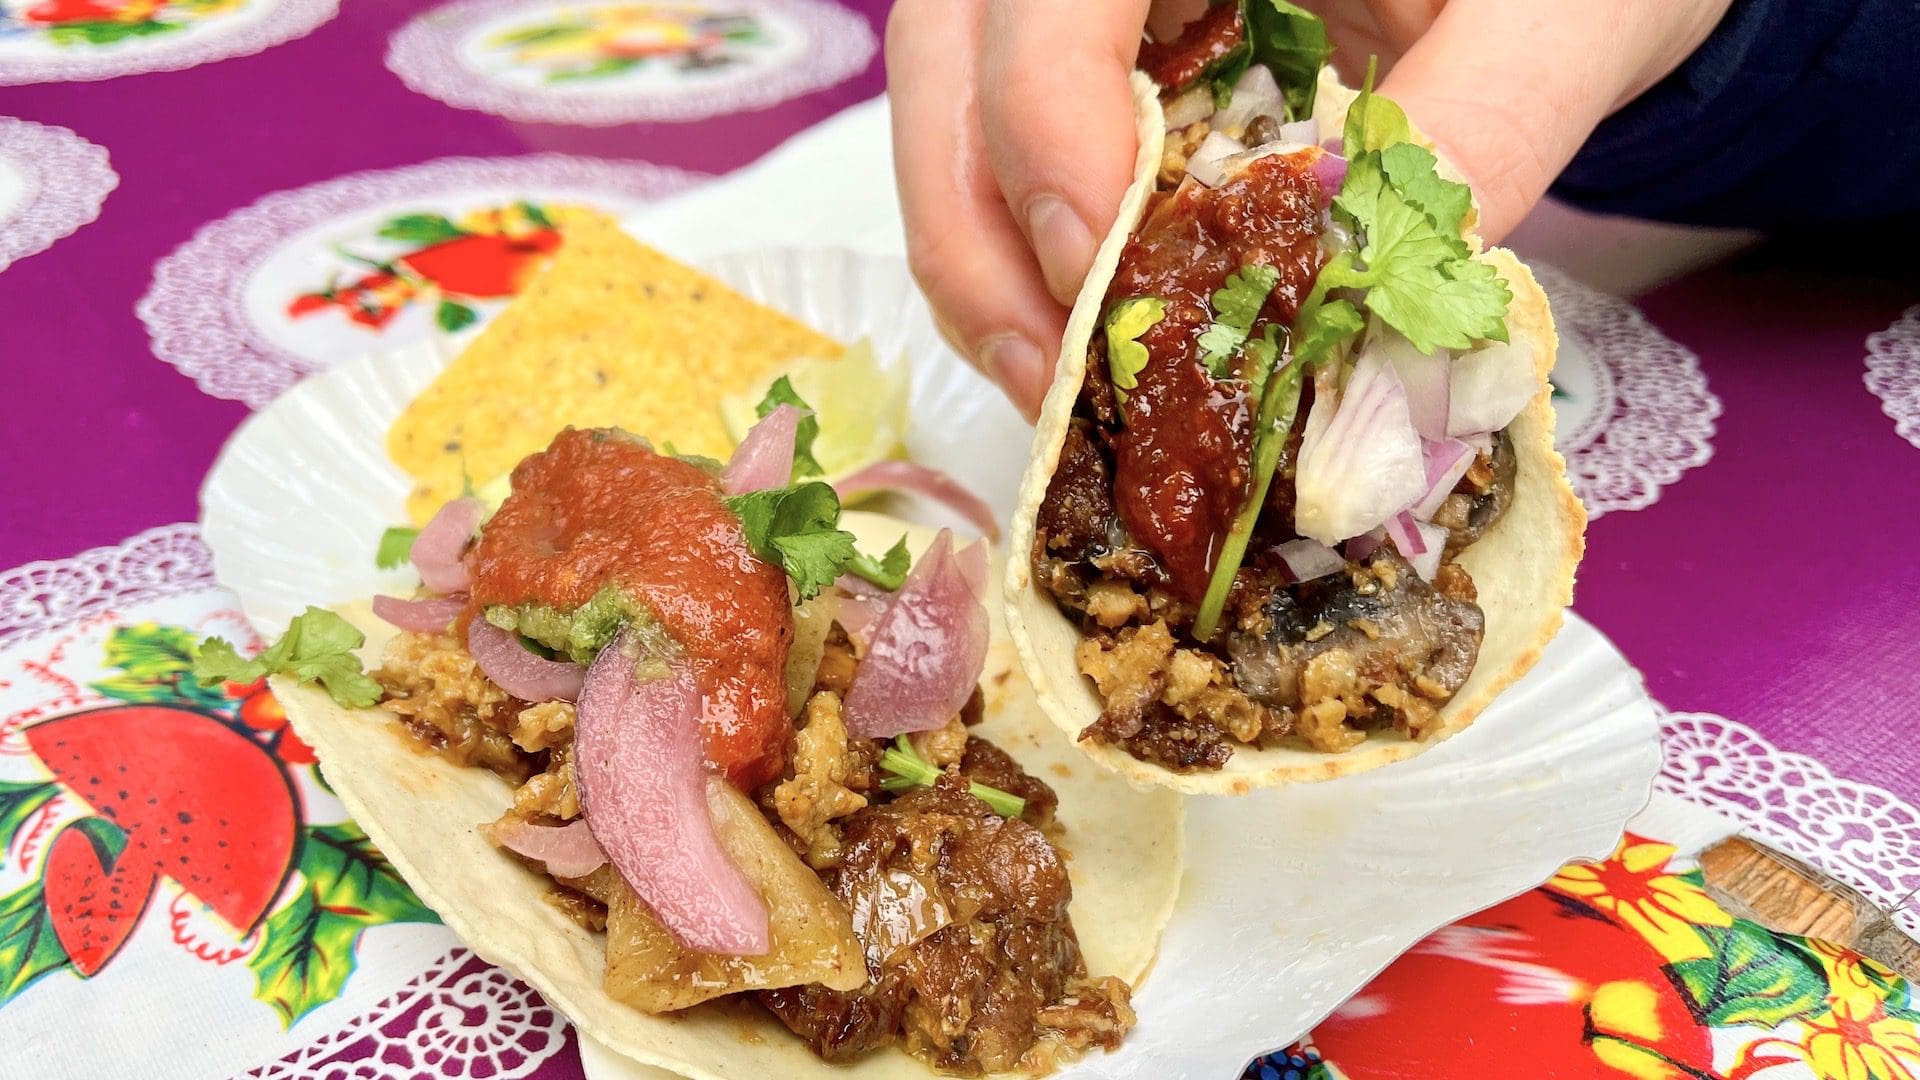 Amazing vegan tacos with seitan and mushrooms from Walk With Us Tours in Berlin Germany